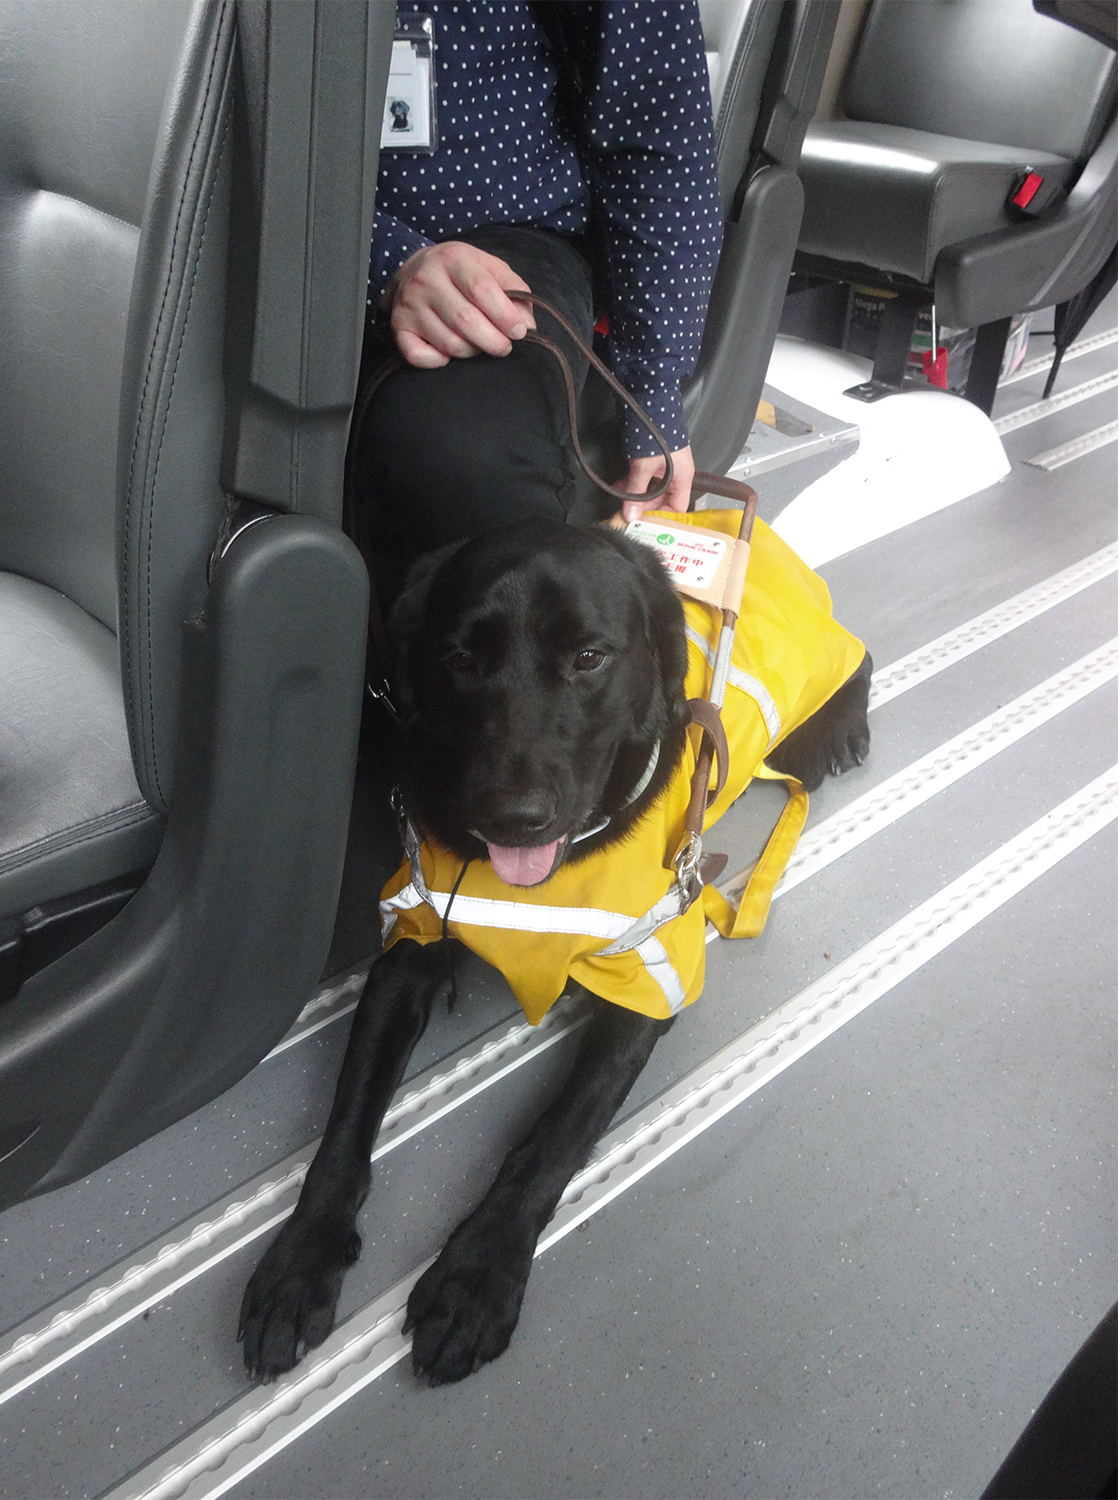 A guide dog traveling with student by school bus